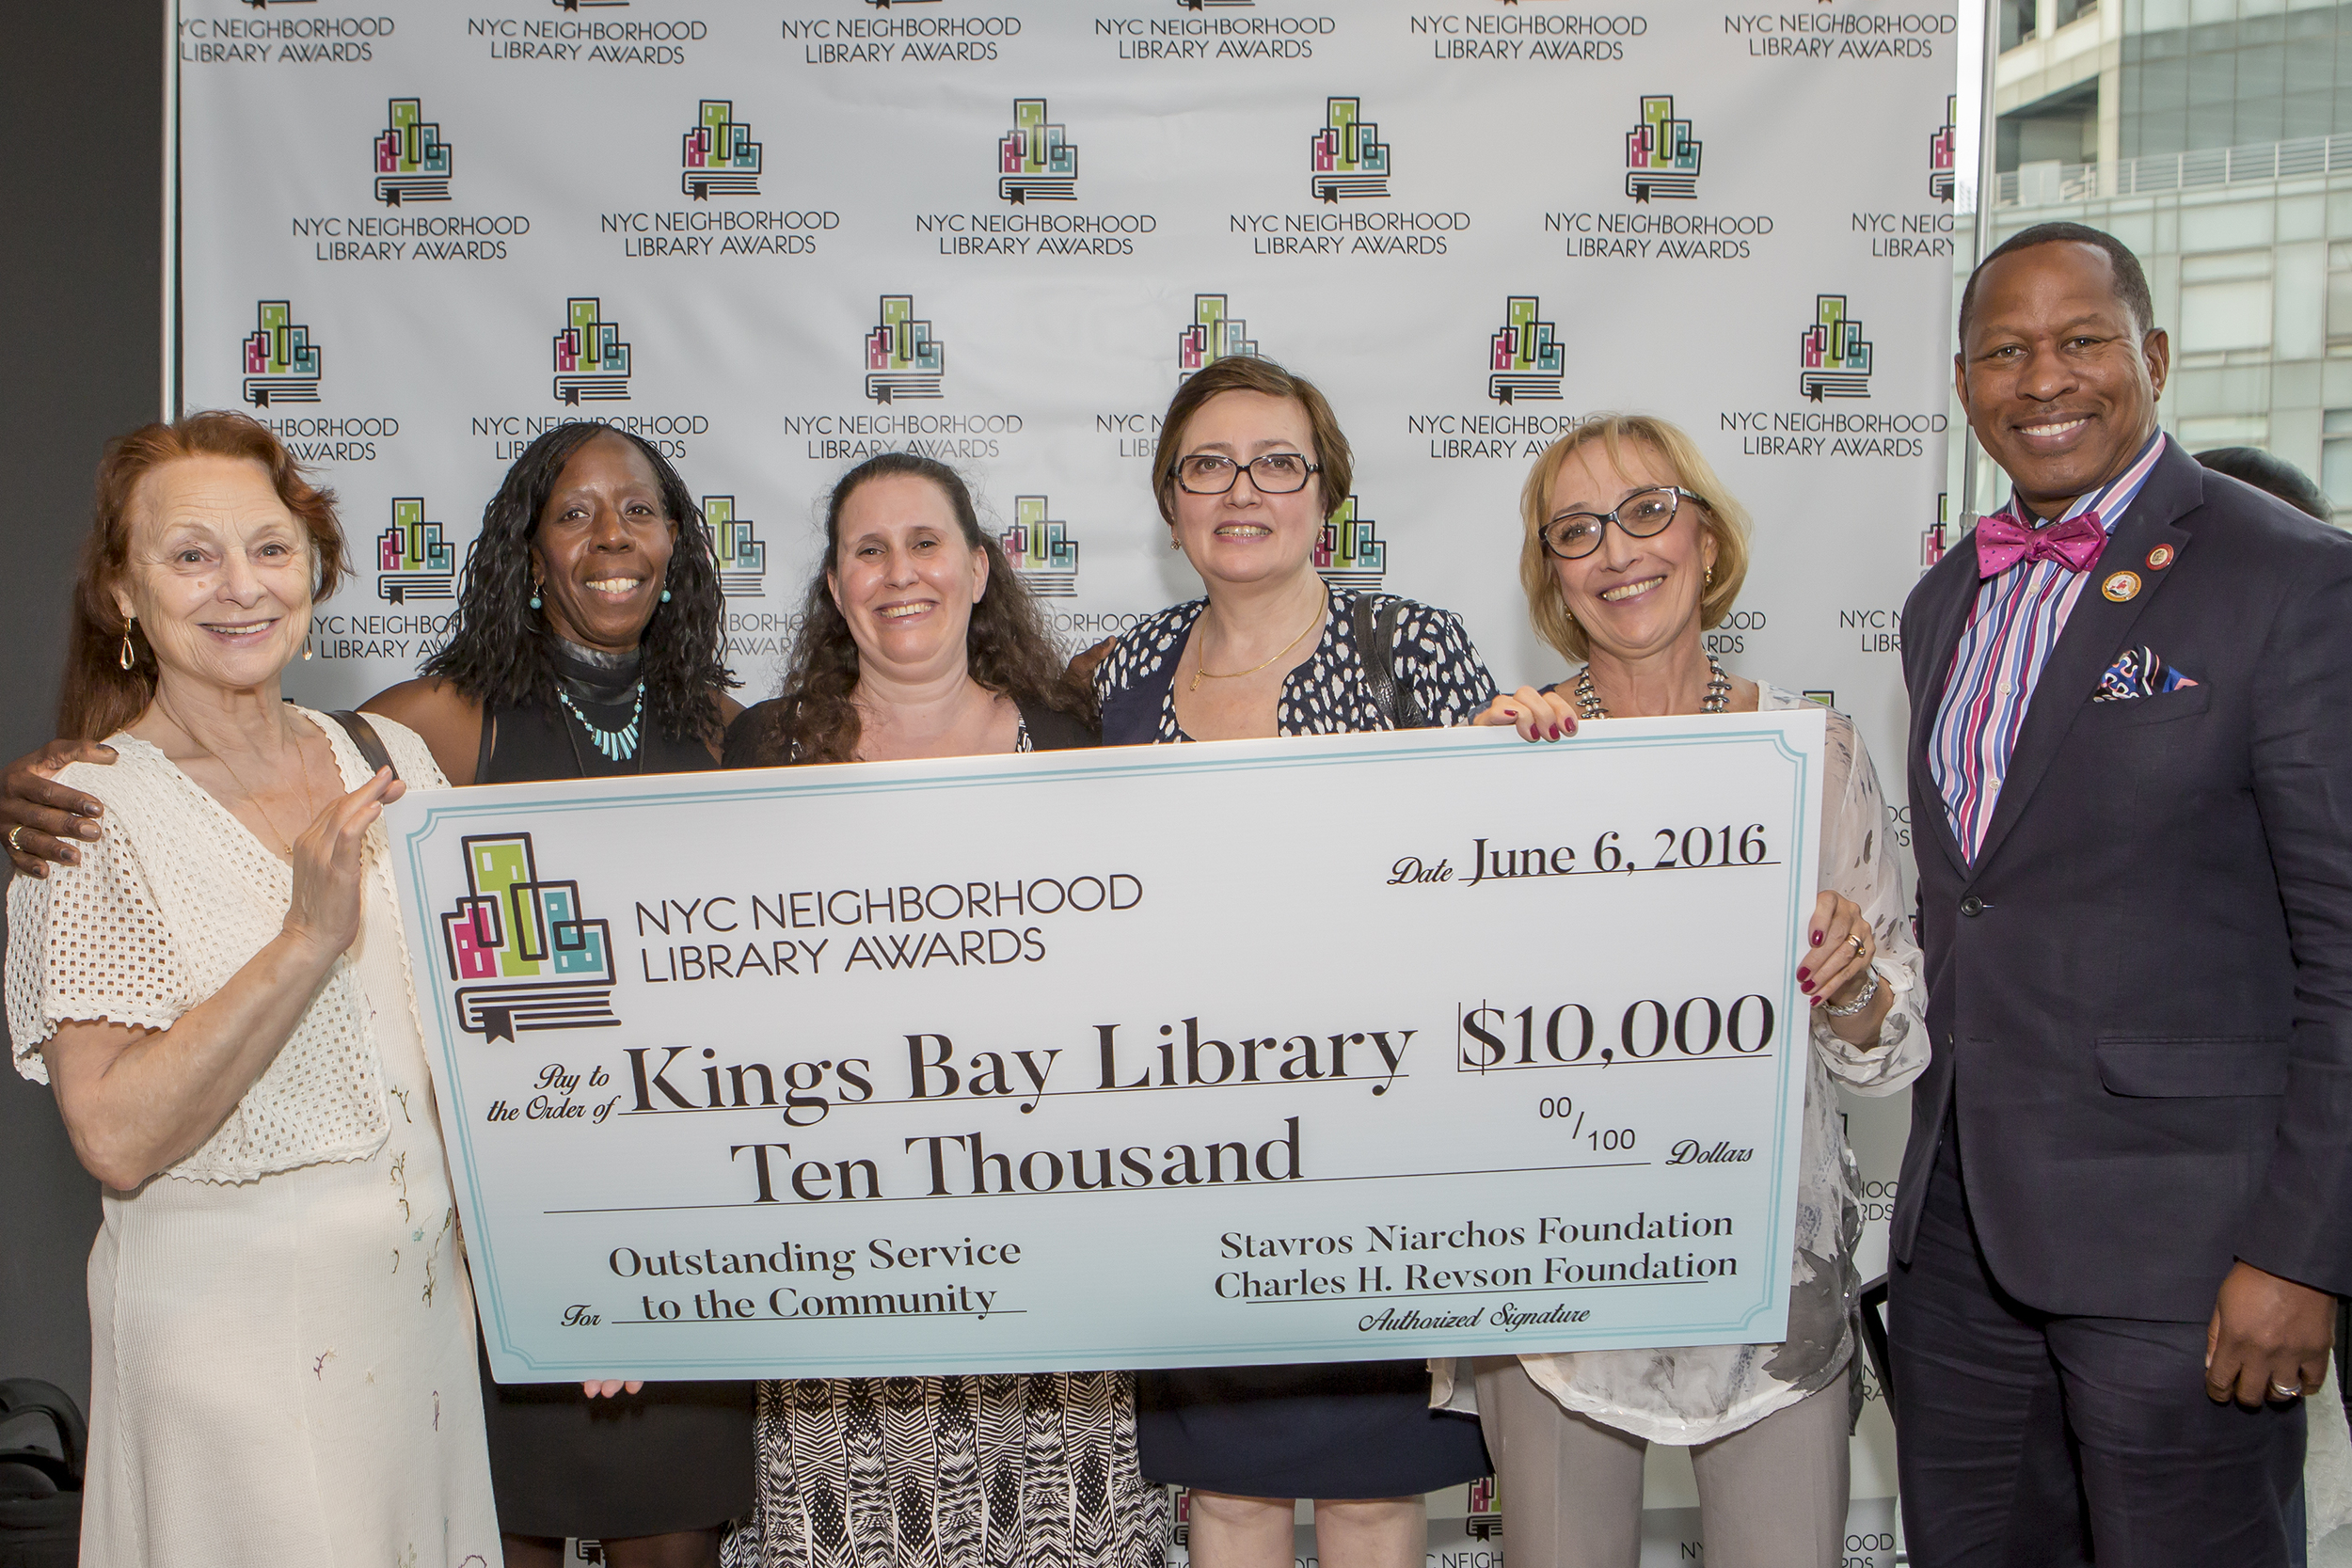 Staff and Patrons of the Kings Bay Library and Council Member Andy King